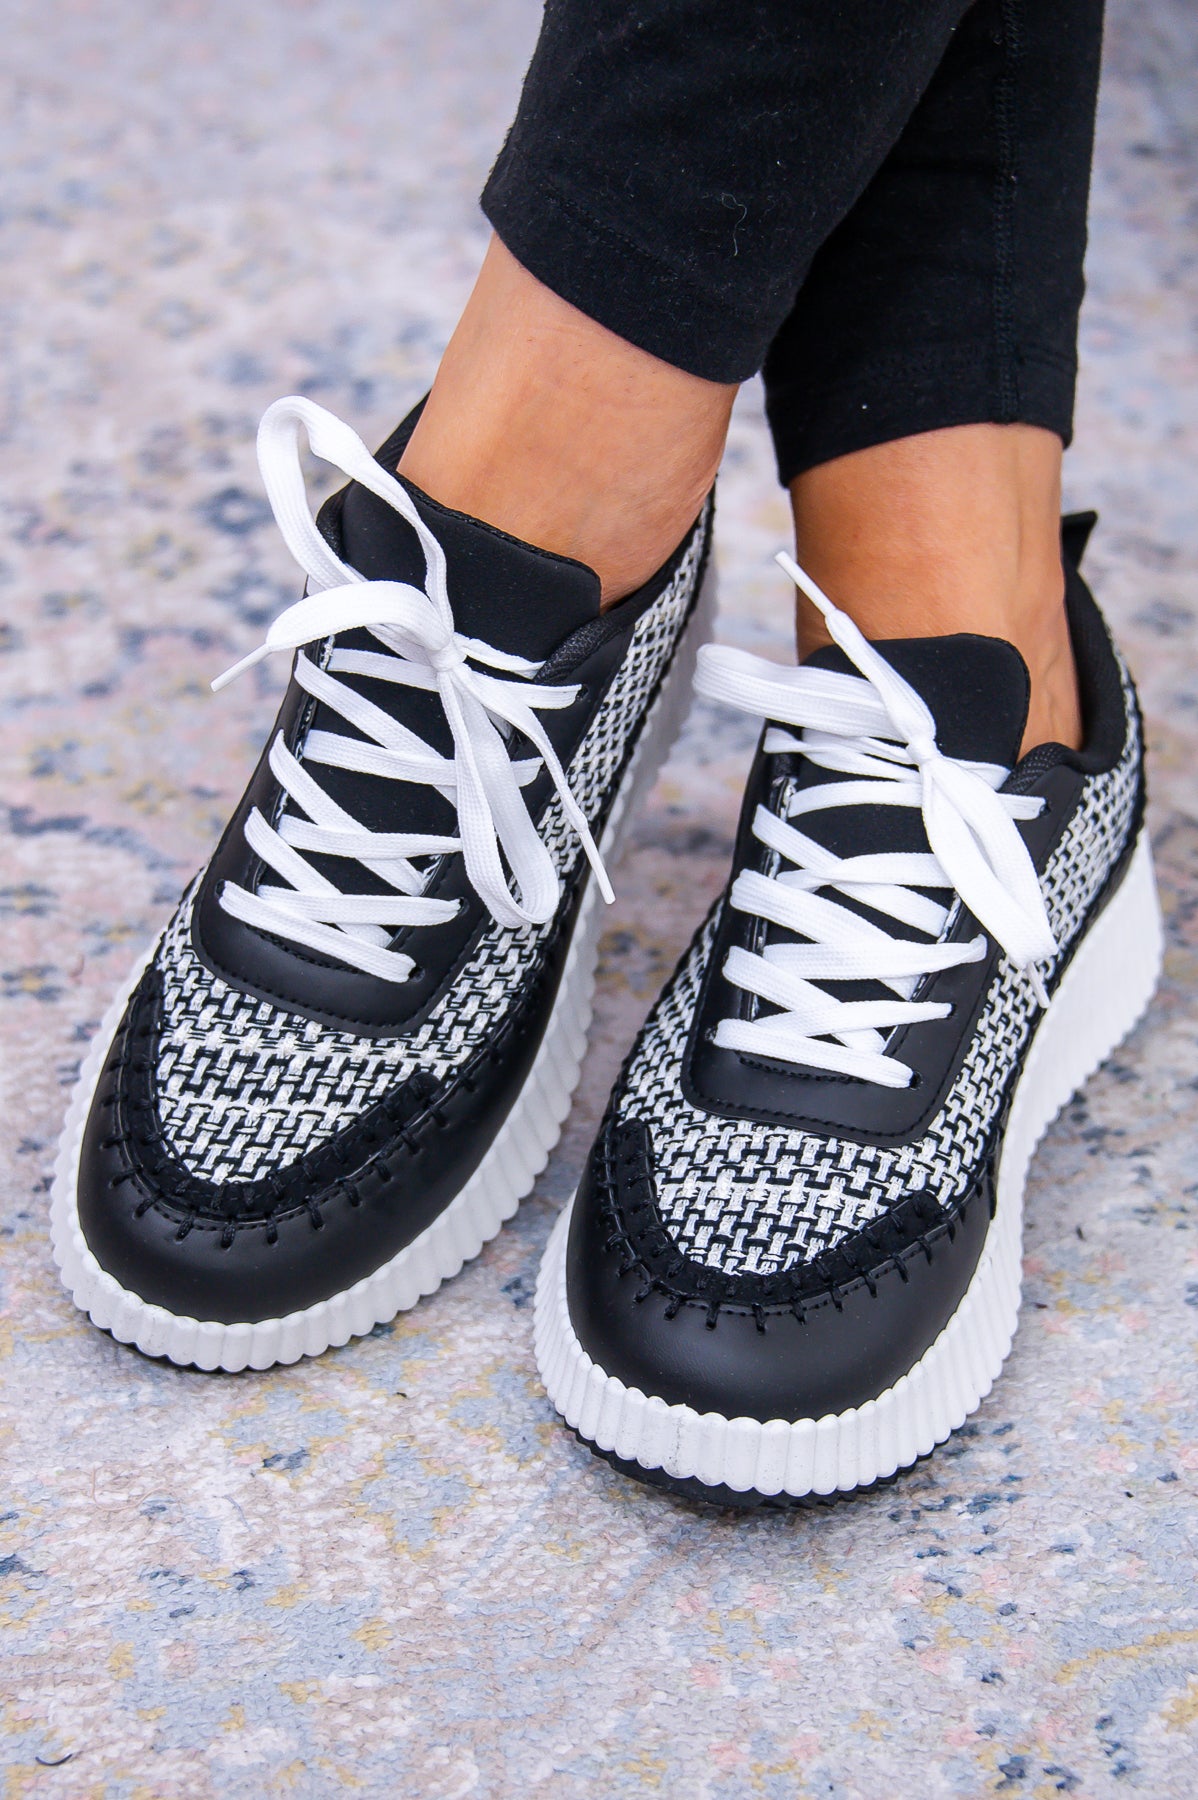 Stepping Into Style Black/White Platform Sneakers - SHO2662BK